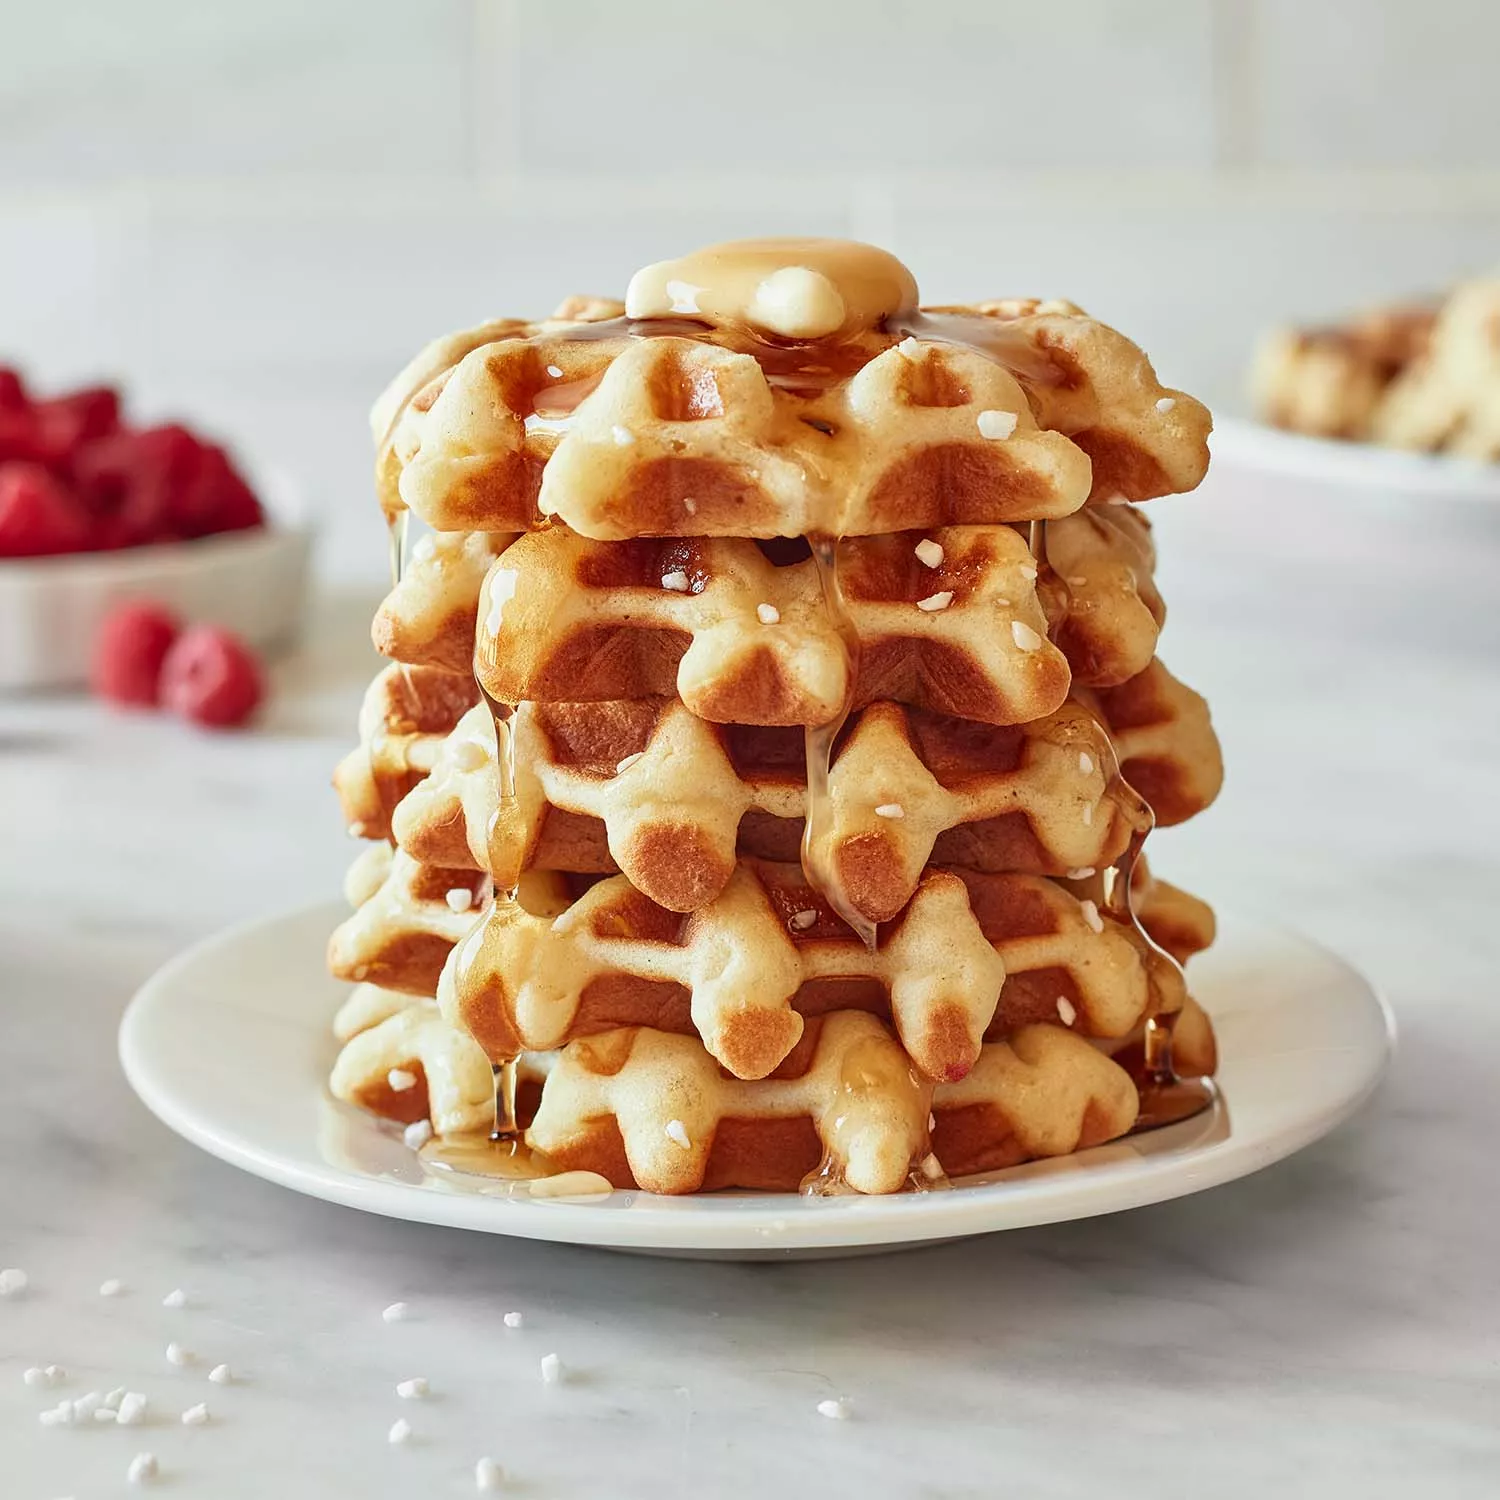 Gaufres Fourrées (Little Sugar Waffles) and Rustic French Cooking Made Easy  - Tara's Multicultural Table